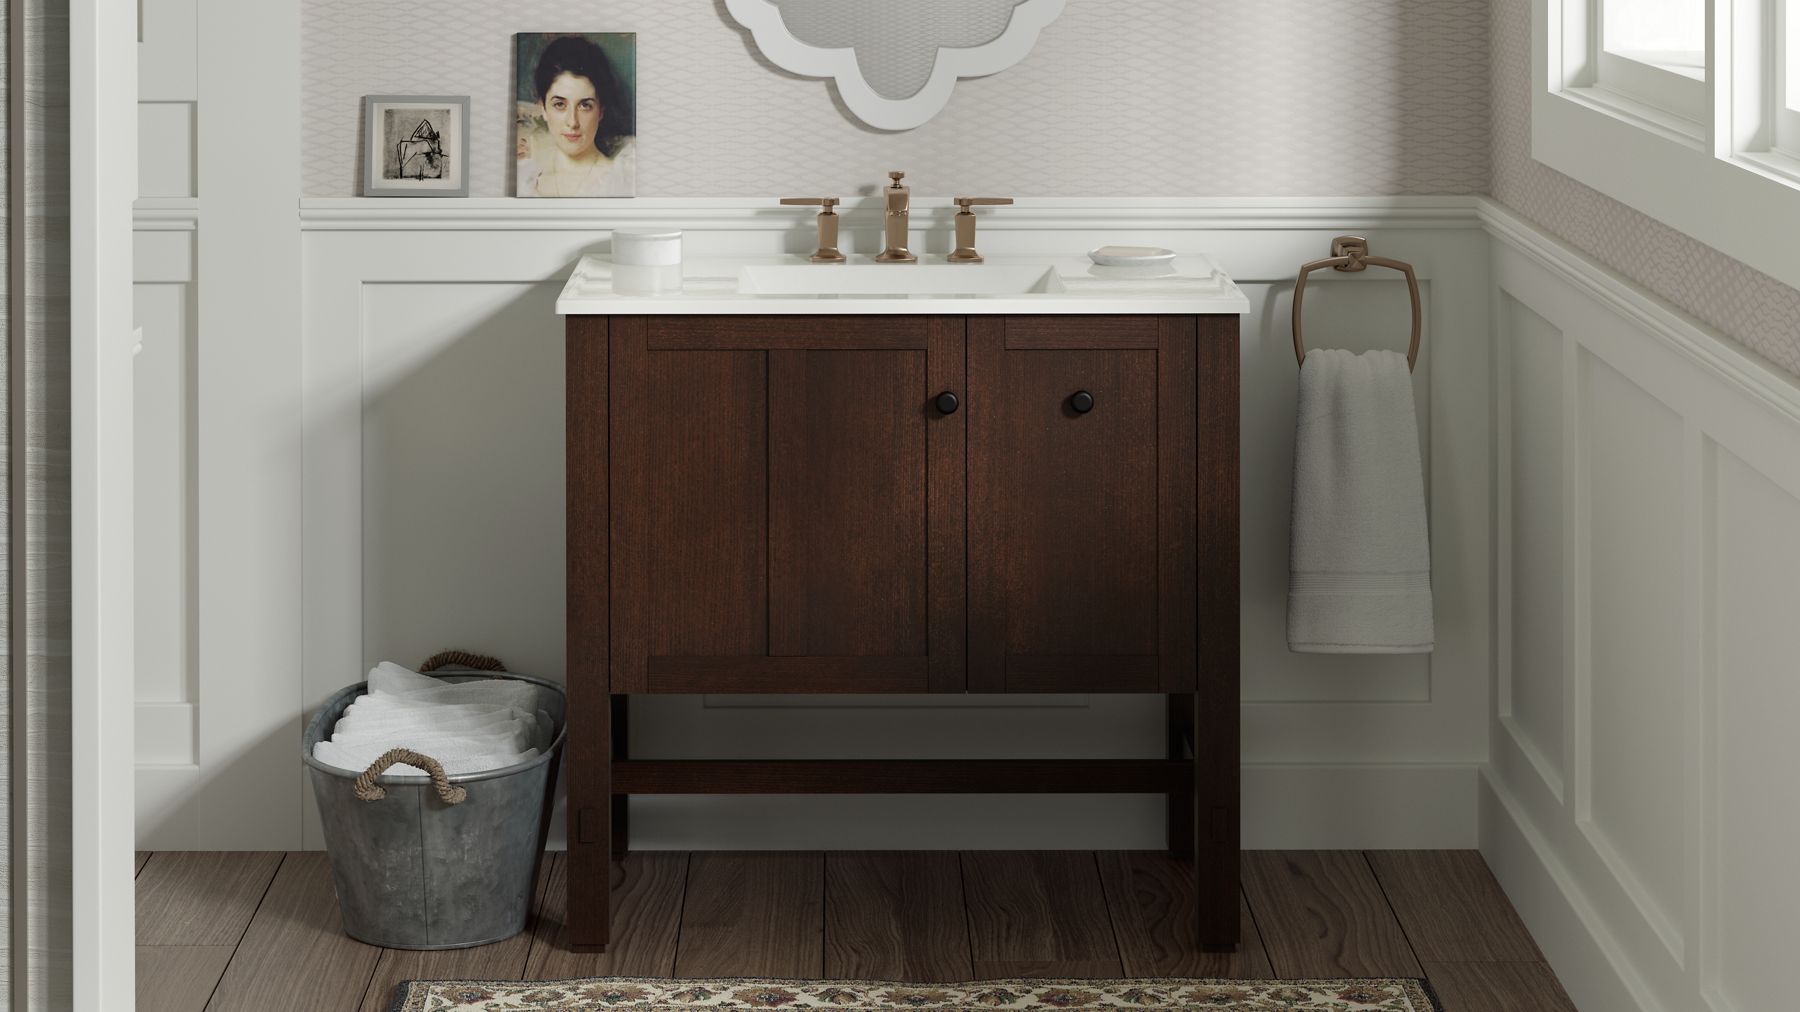 Designer bathroom with wooden cabinet and white French-themed walls